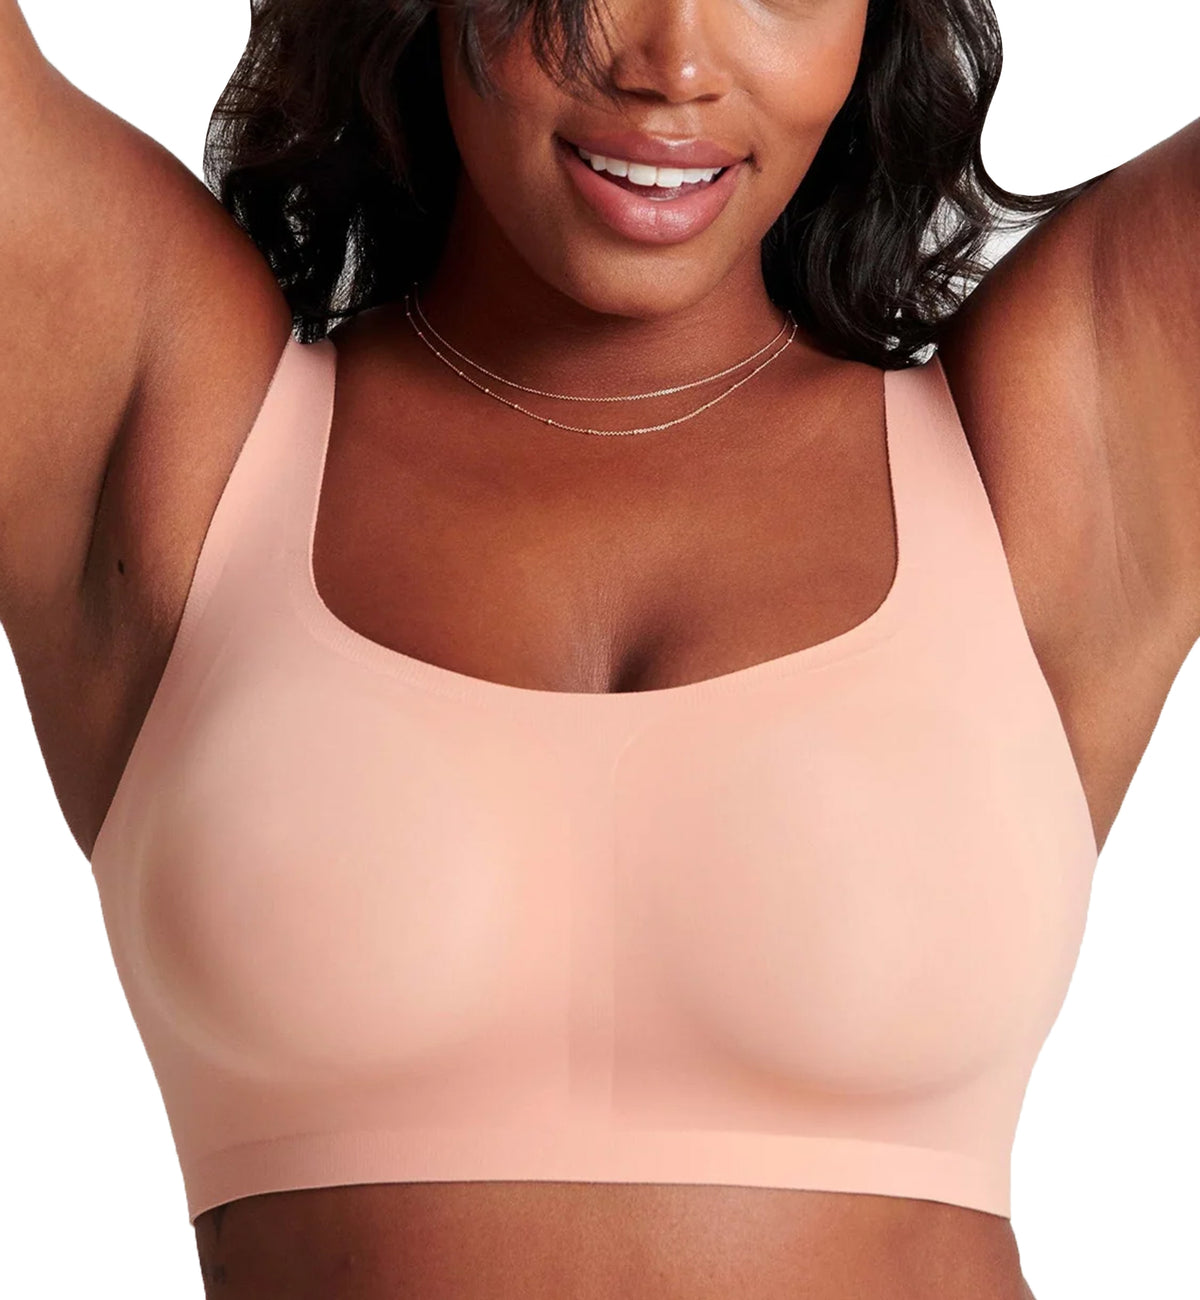 Evelyn & Bobbie Products - Bra Necessities